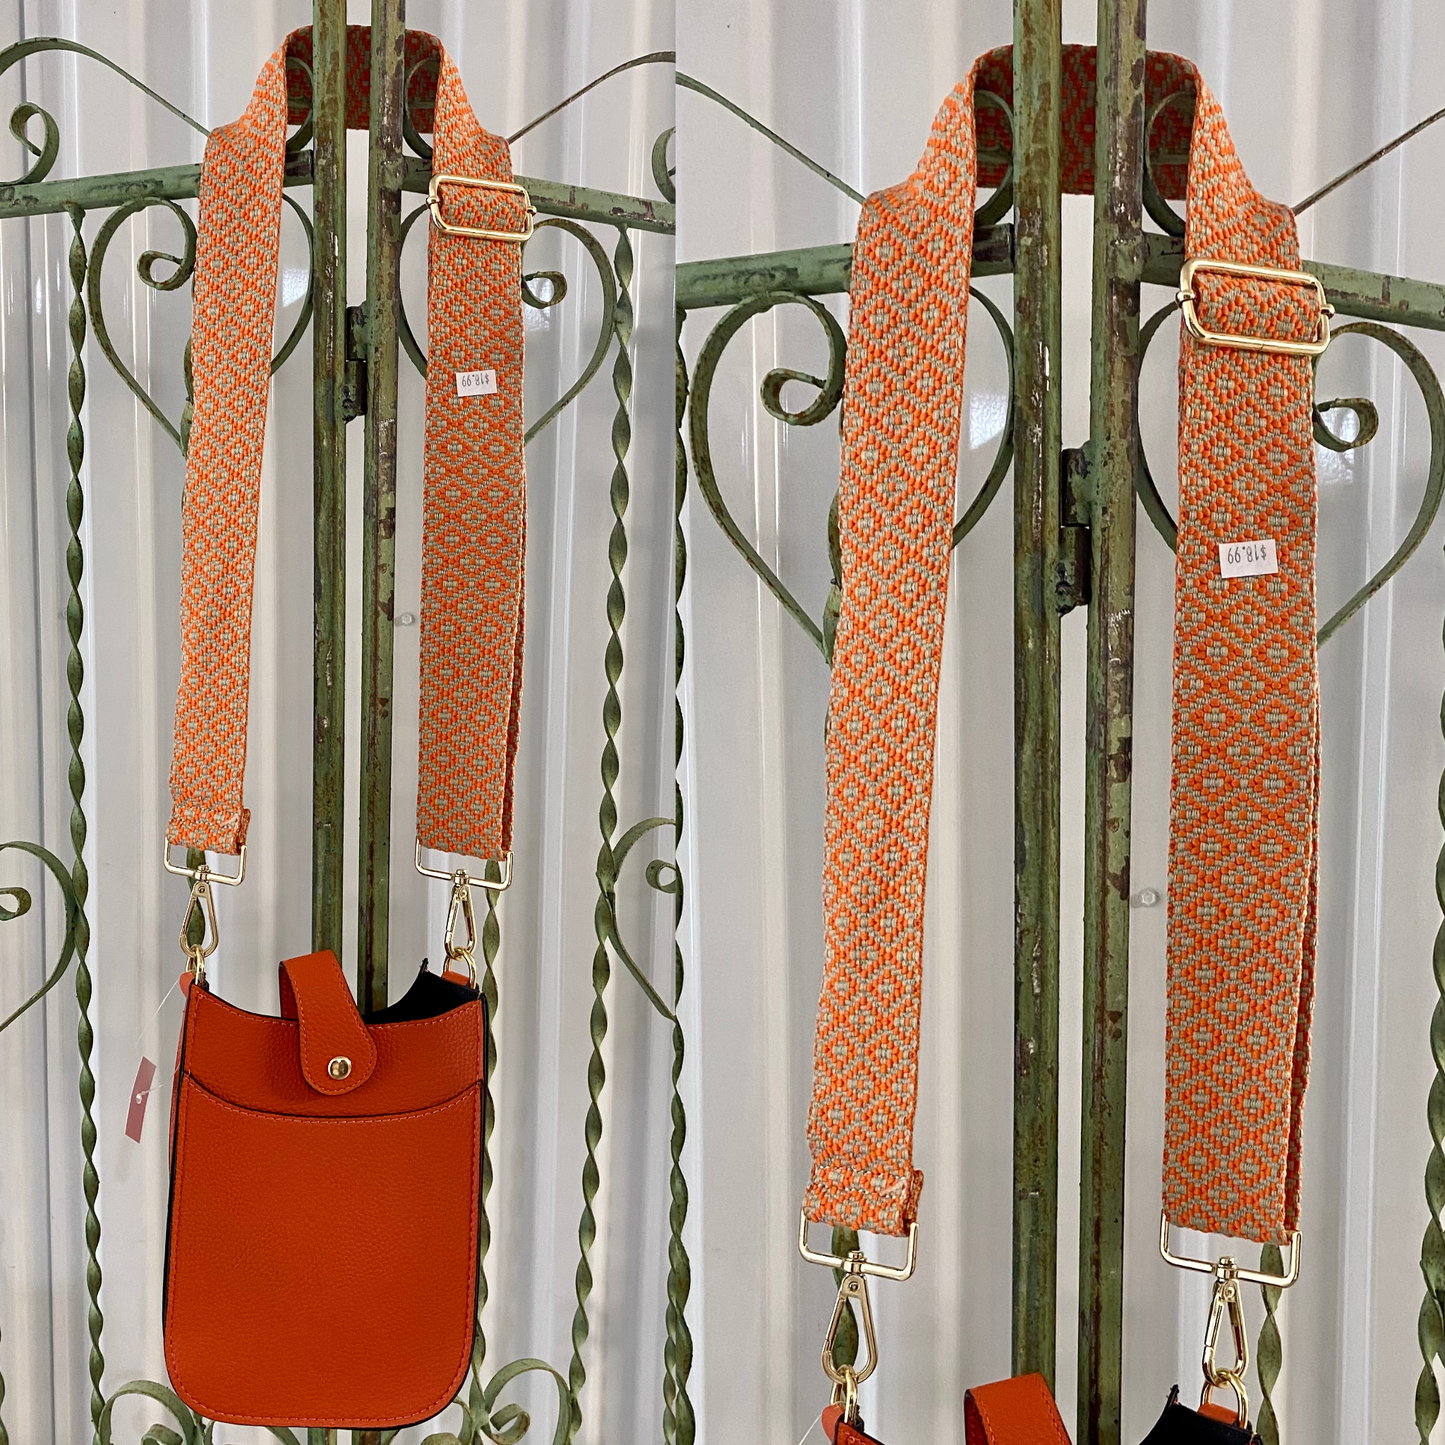 Change the look of any purse! These stylish guitar style strap adds a pop of color and fashion to any bag, big or small. Adjustable down to 29 inches for a belt bag, or 52 inches at its longest length for a crossbody strap. The newest trend in handbags, at a fraction of the designer price!The Orange Pattern Adjustable Purse Strap Crossbody, Shoulder Belt Bag